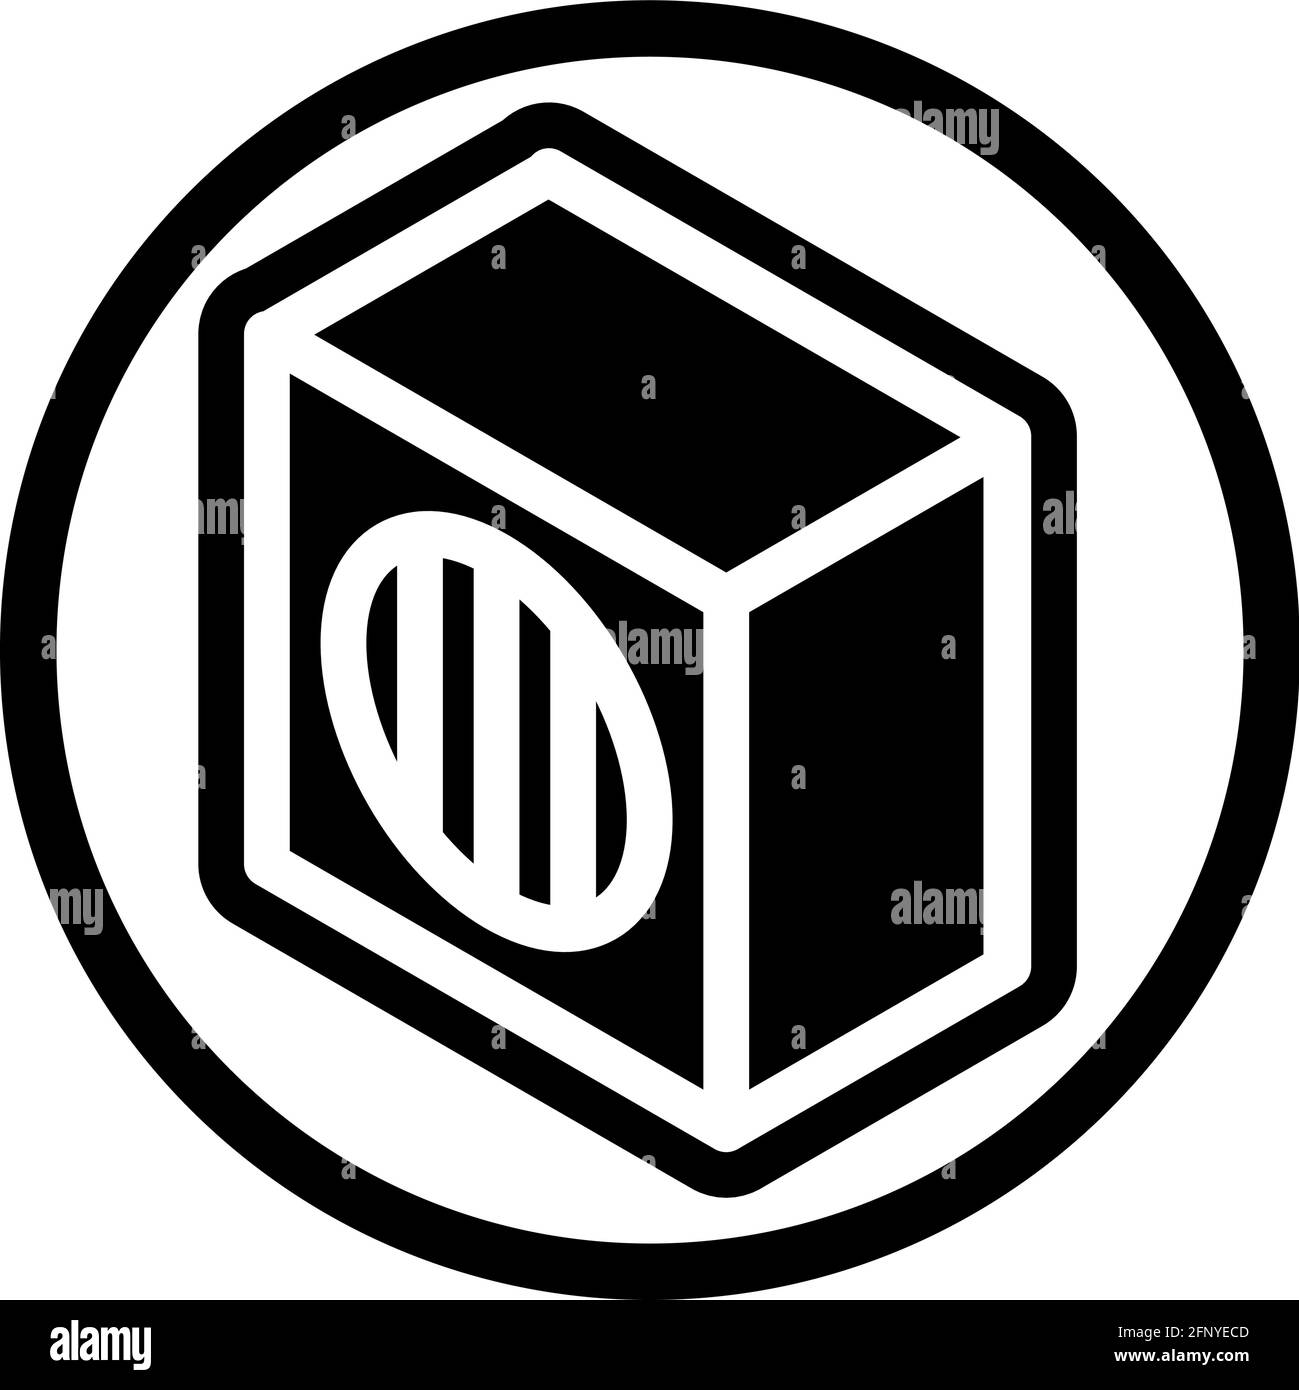 Outdoor unit icon in isometric flat design with black color and outline on a line circle background. Stock Vector